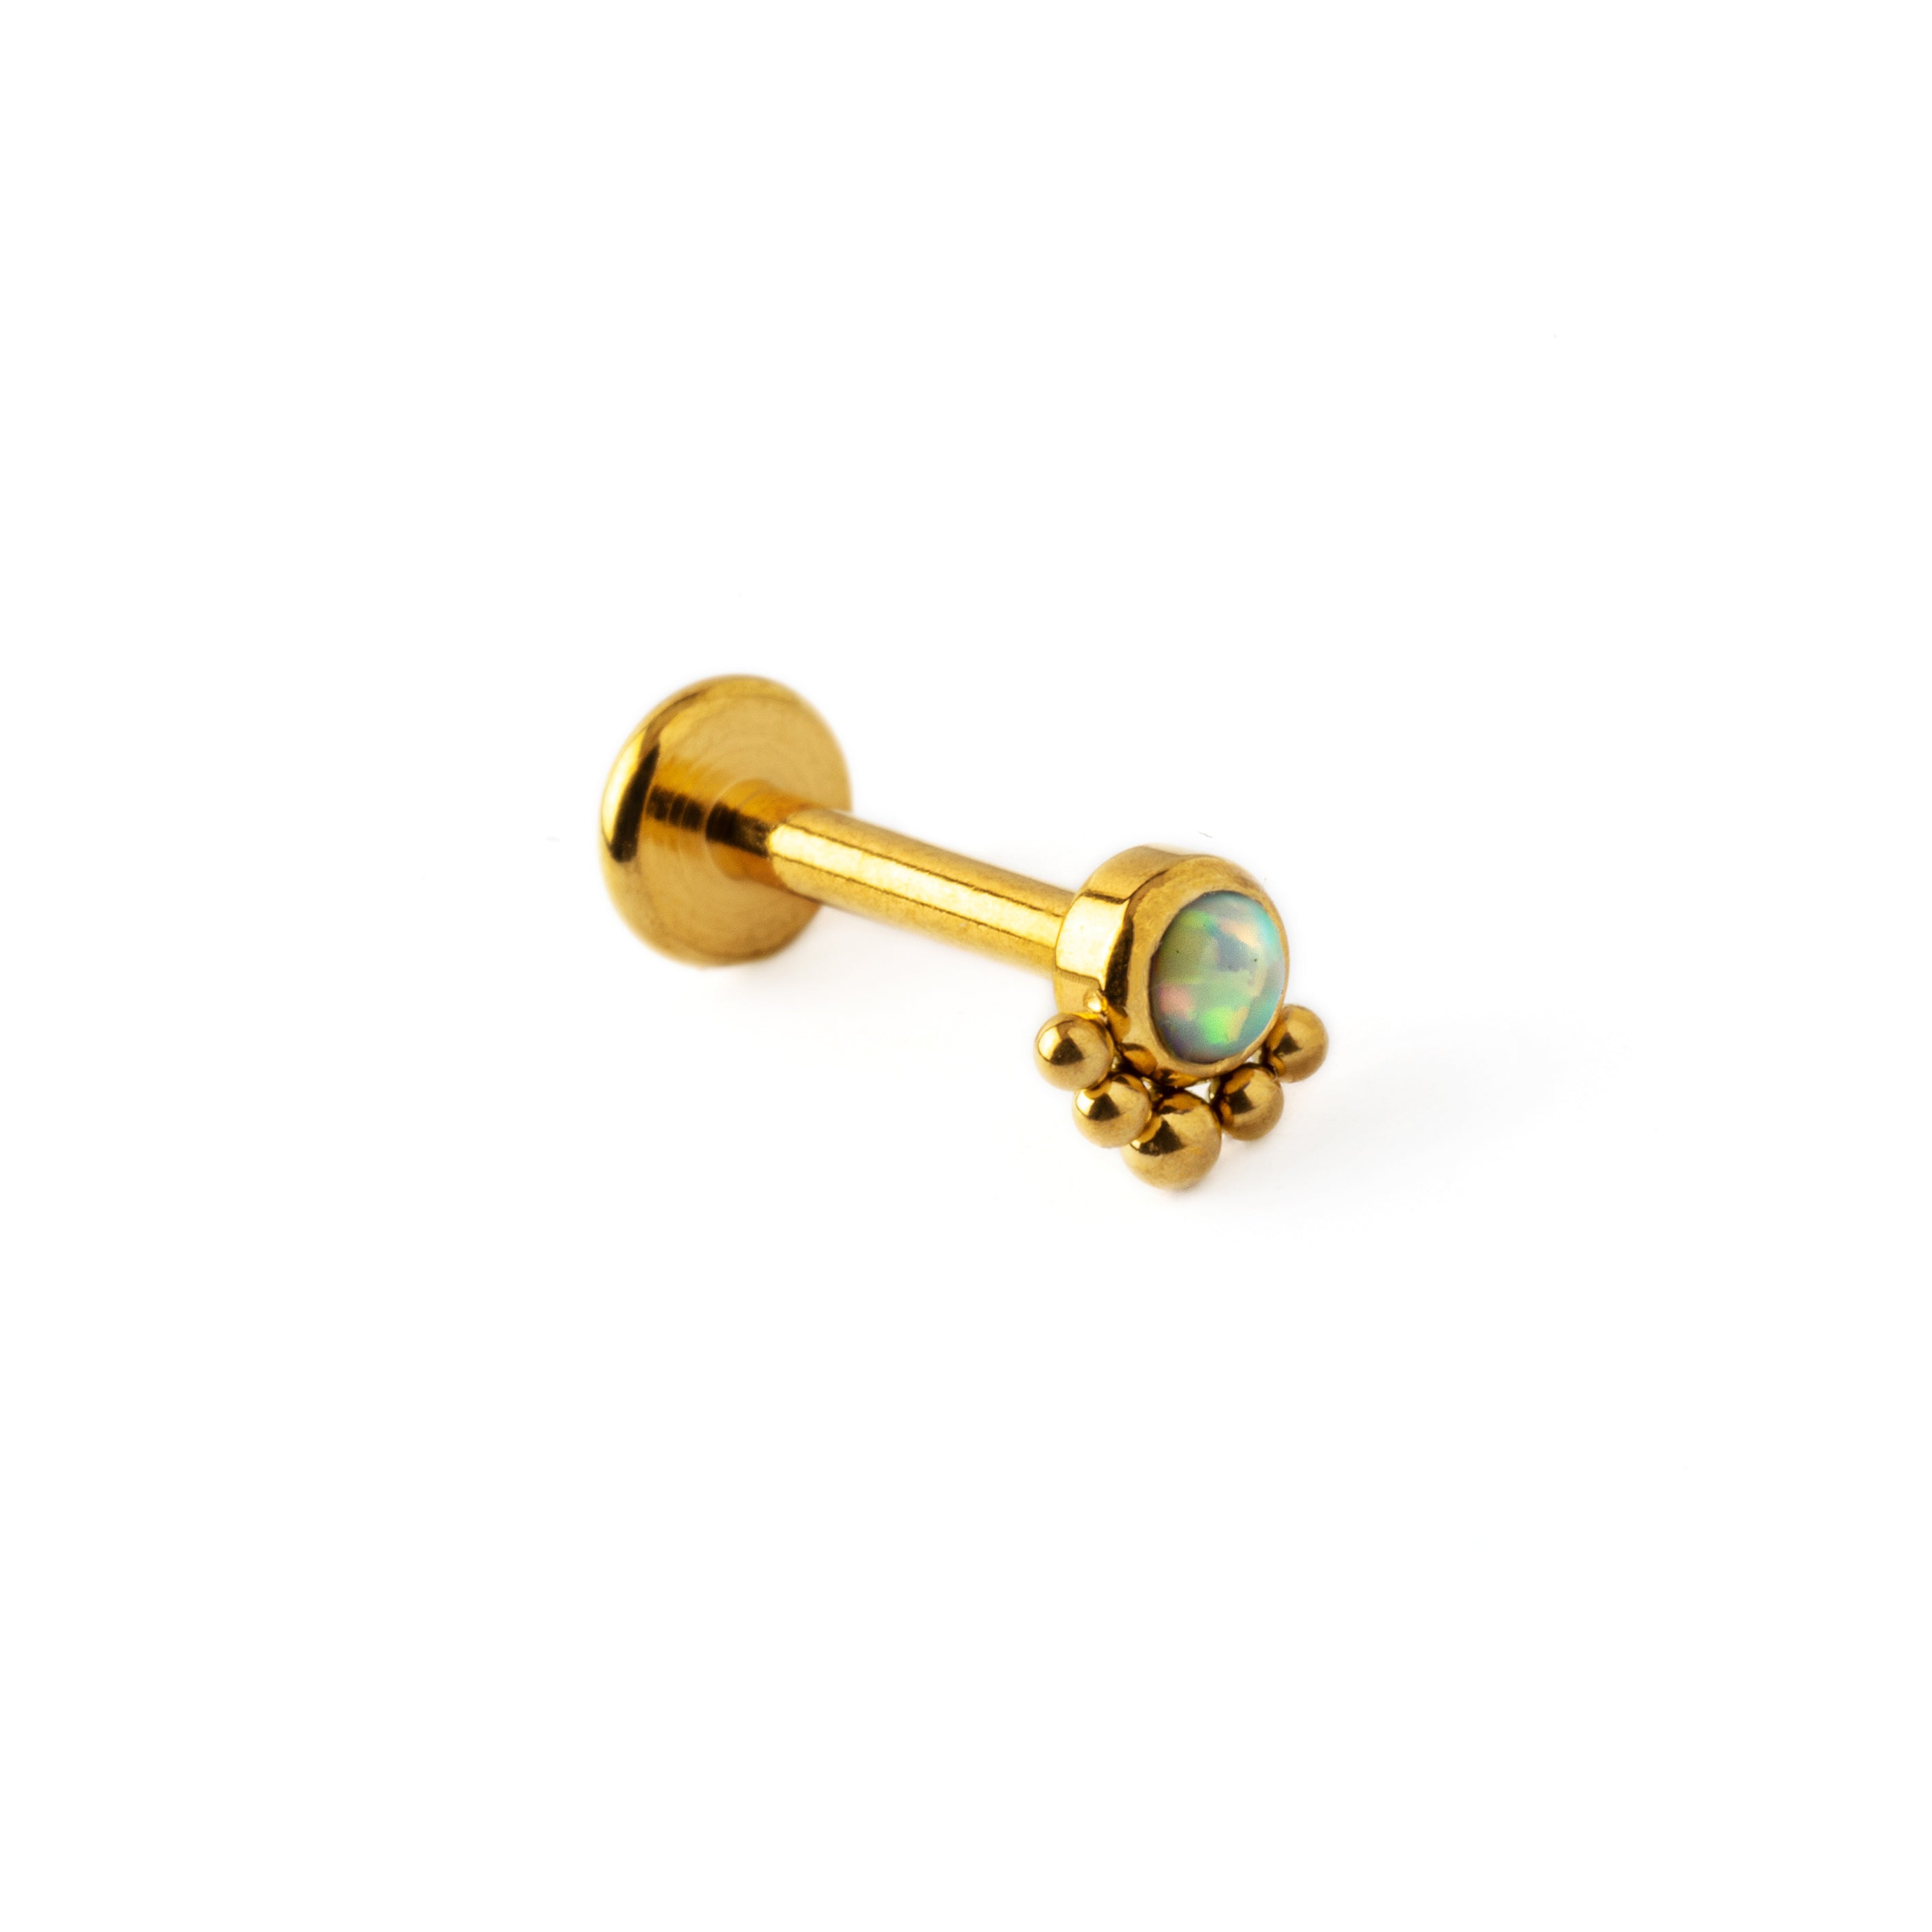 Layla golden surgical steel internally threaded labret with white opal left side view